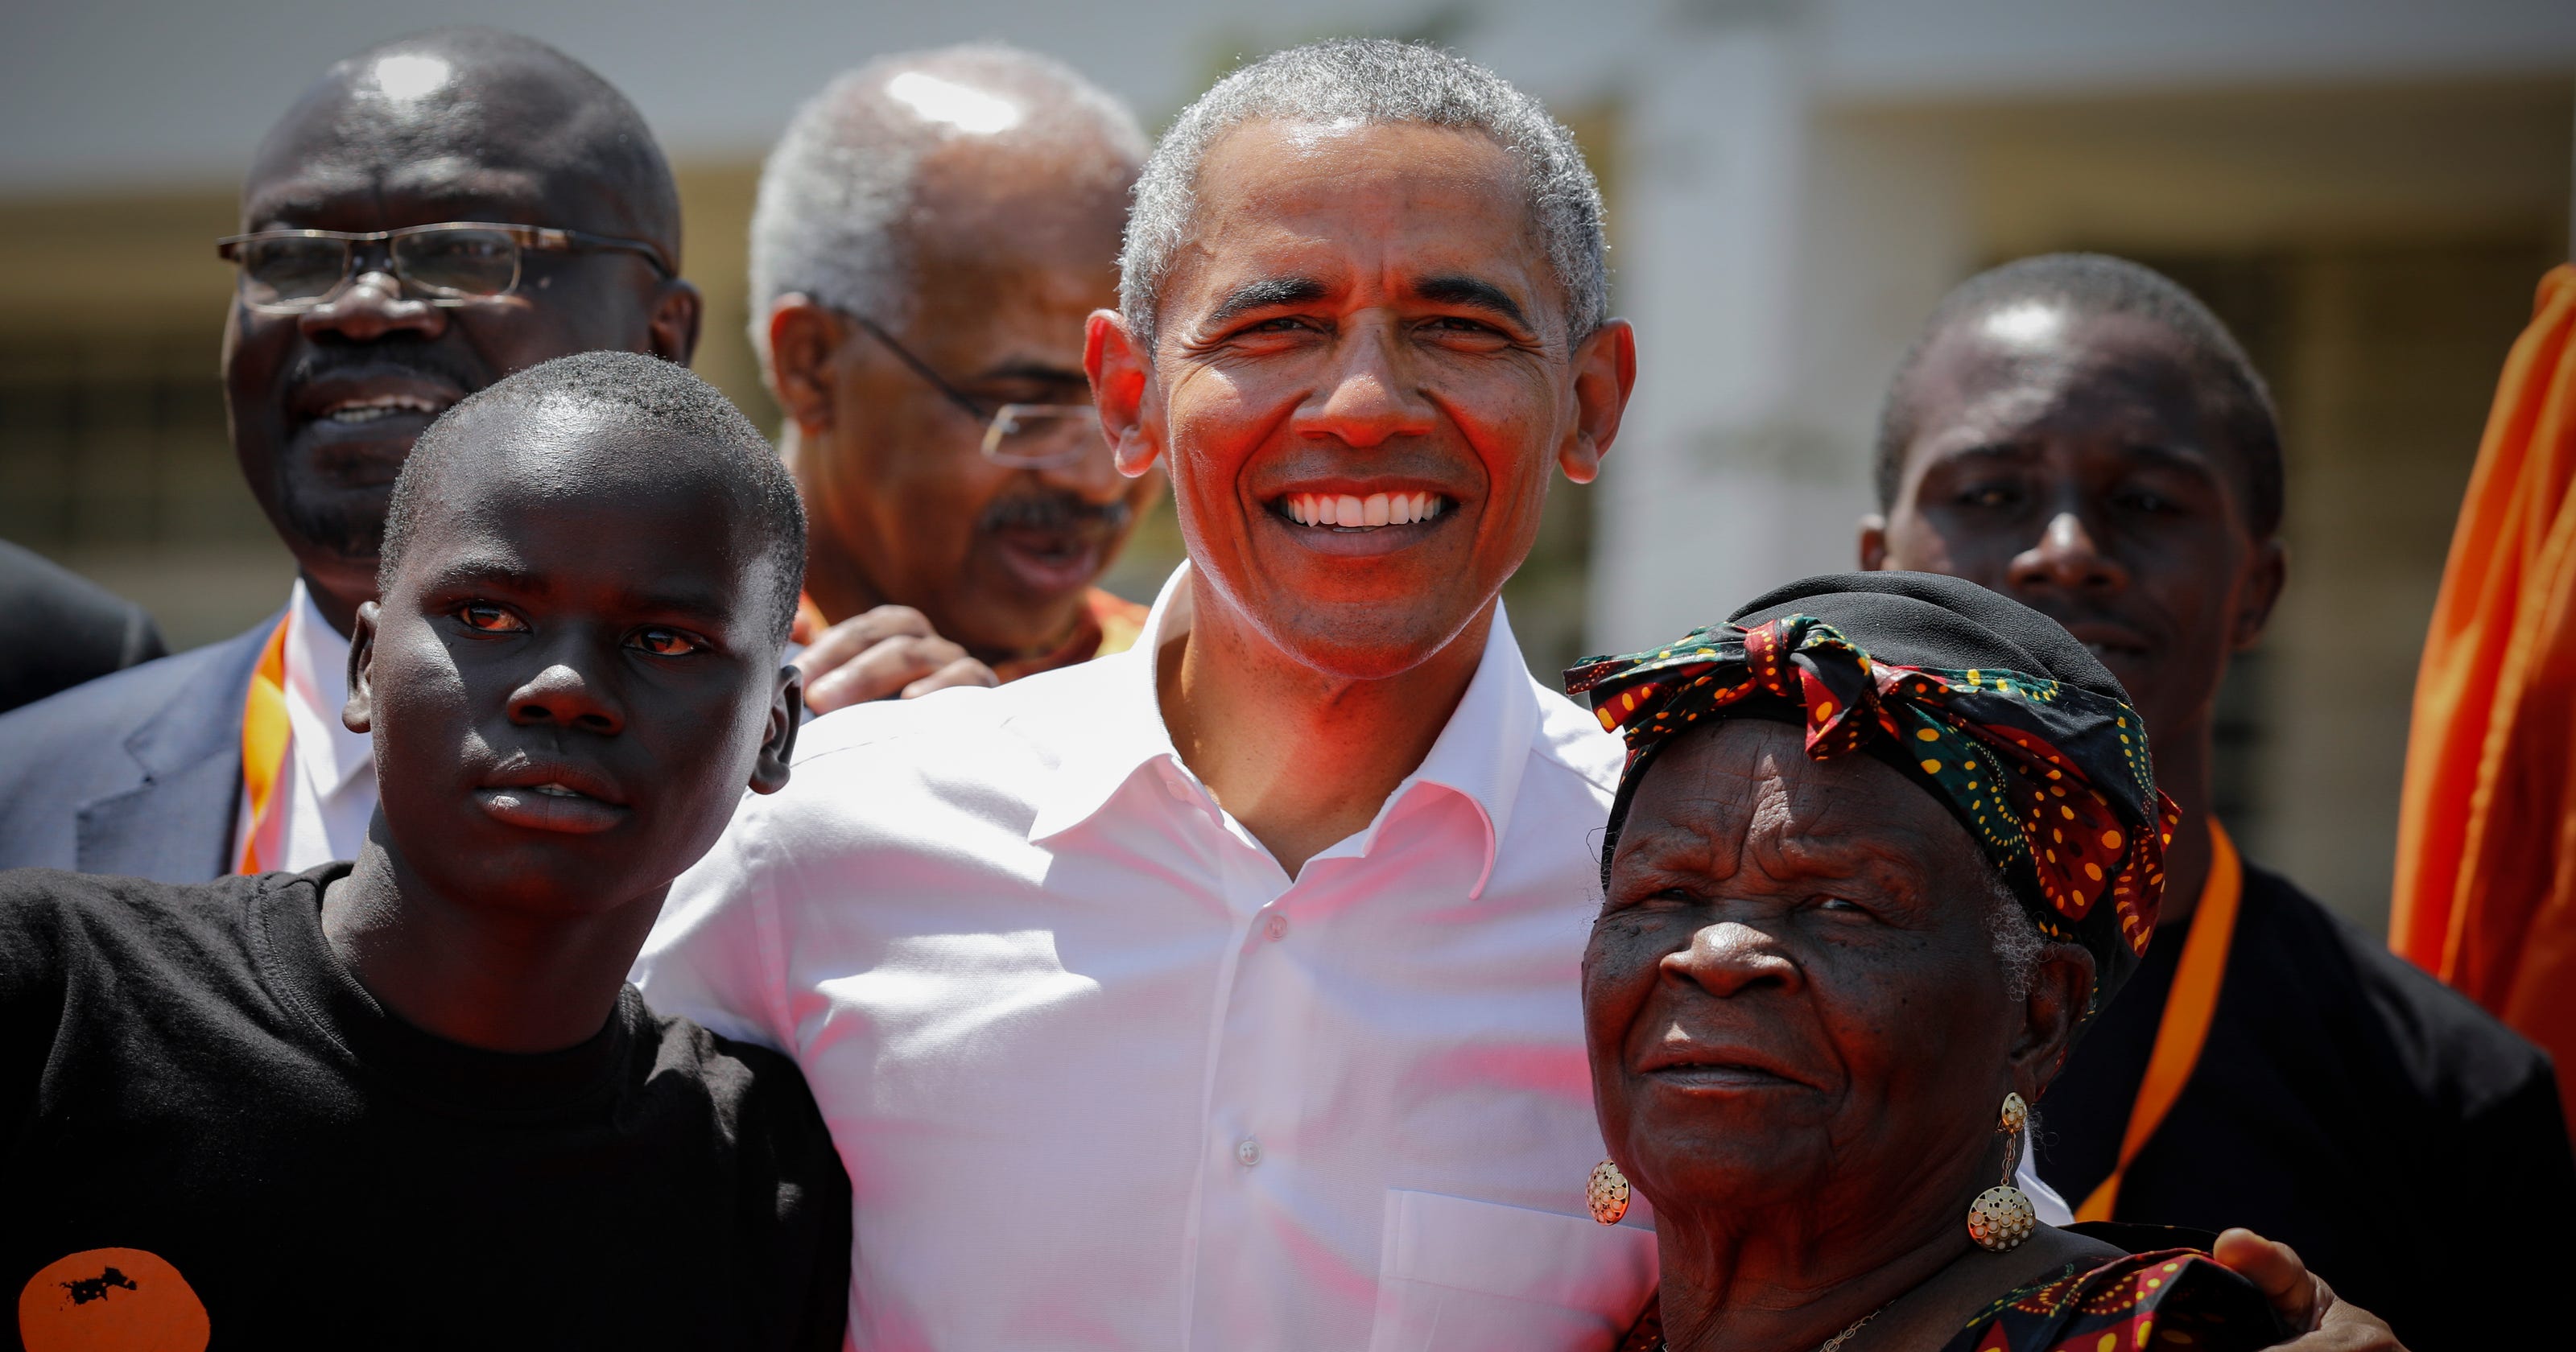 us president visits to africa